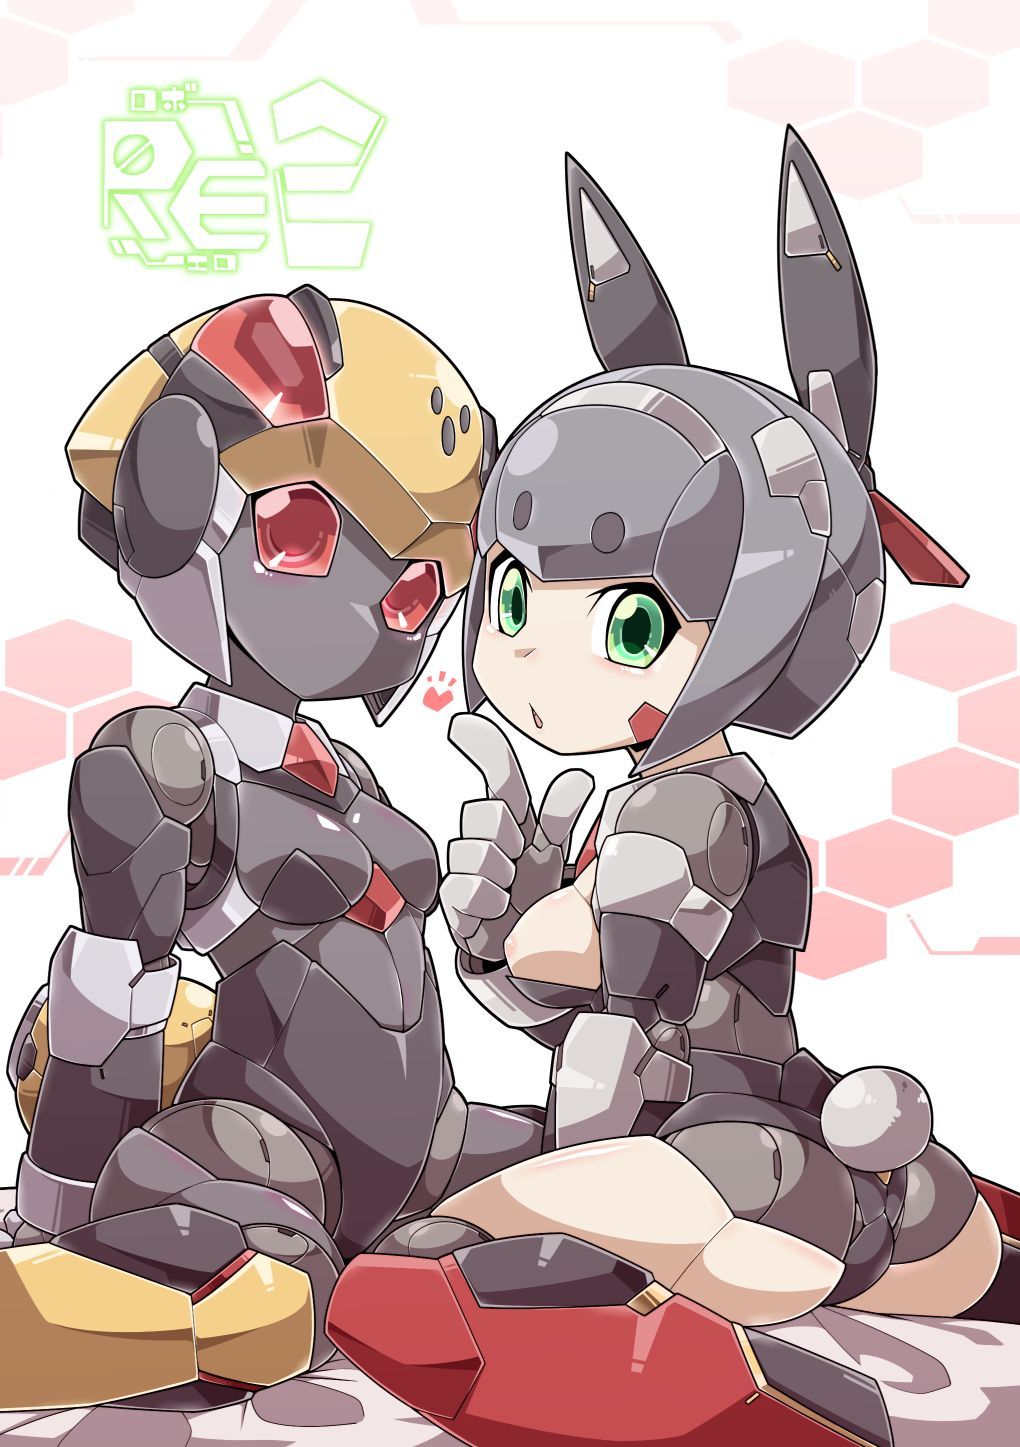 [Pixiv] kni-droid (Kにぃー, weis2626) (Pixiv ID: 1937581) 70